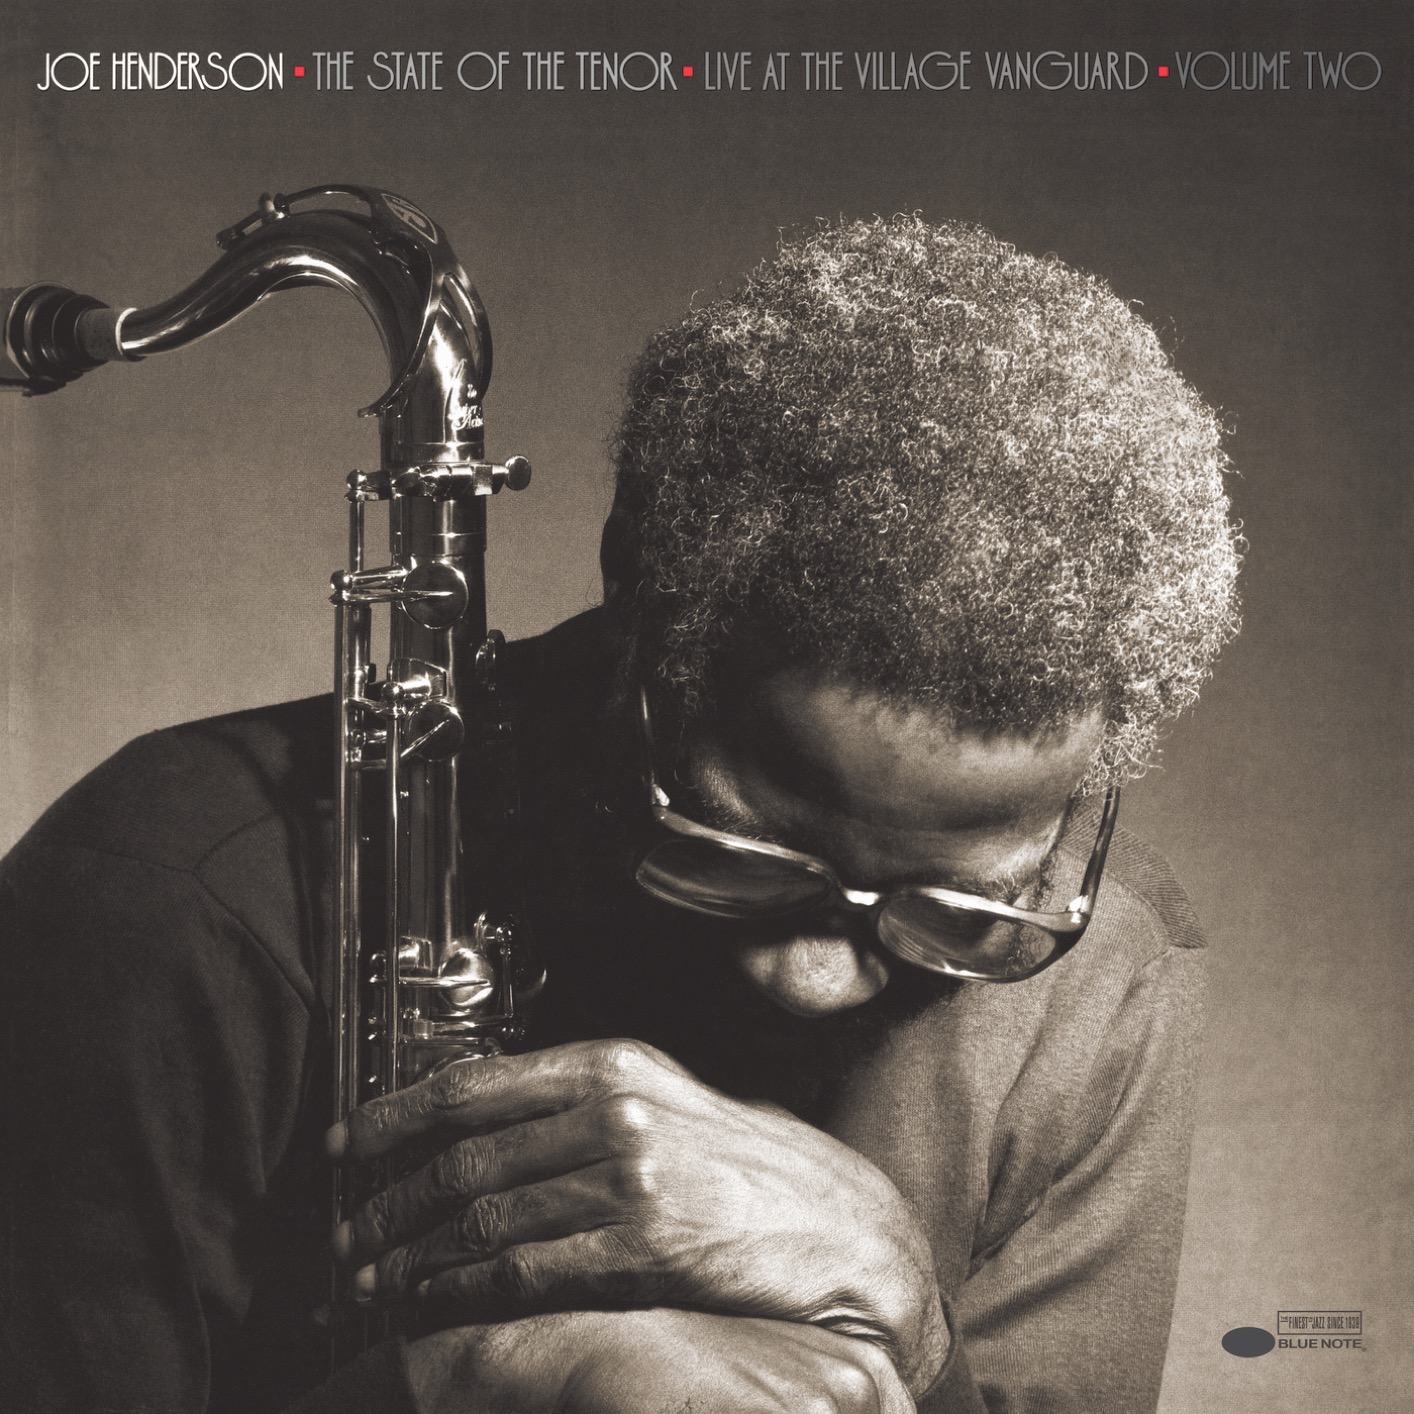 Joe Henderson – The State Of The Tenor (Remastered) (2019) [FLAC 24bit/96kHz]